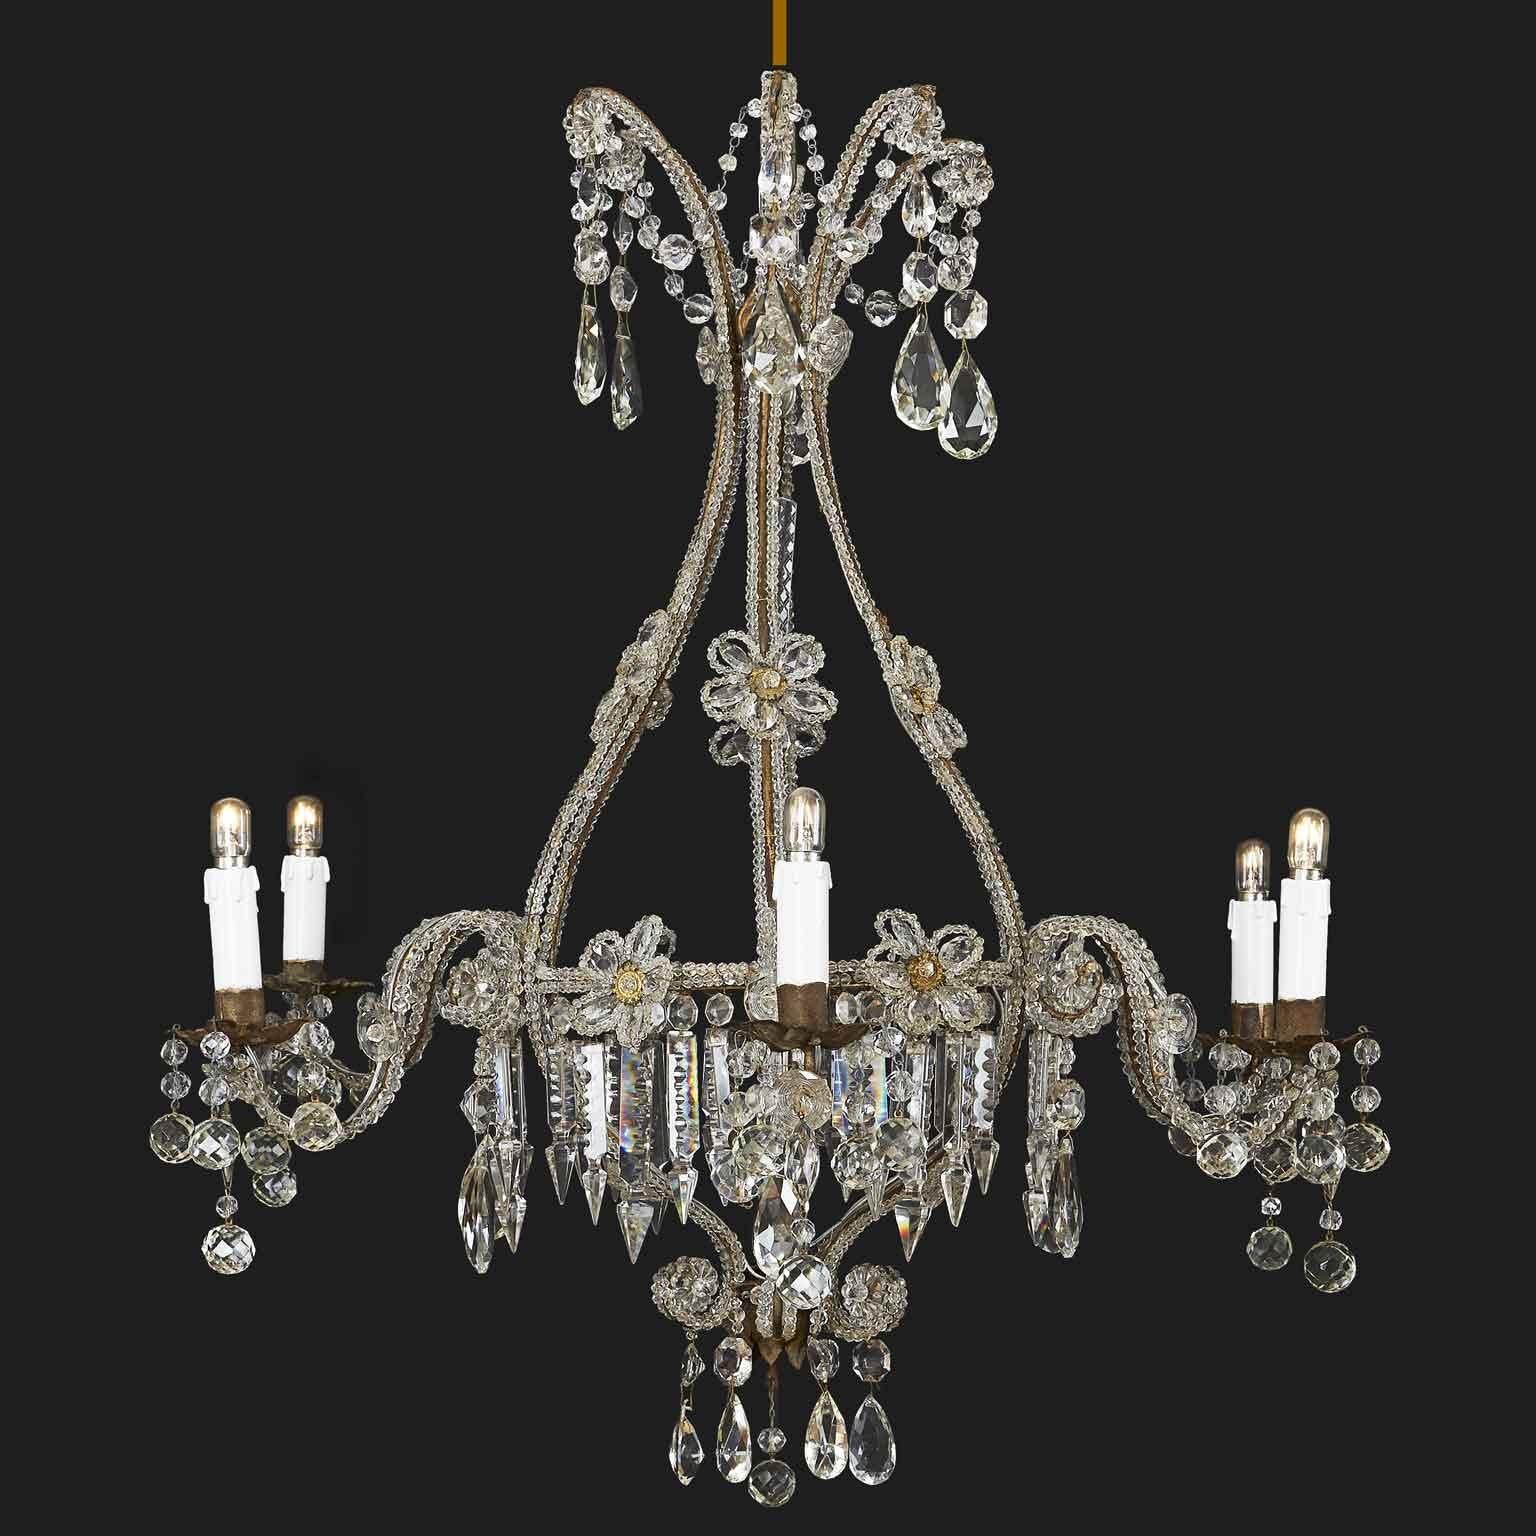 Hollywood Regency Early 20th Century Italian Beaded Crystal Flower Chandelier with Gilt Buttons For Sale